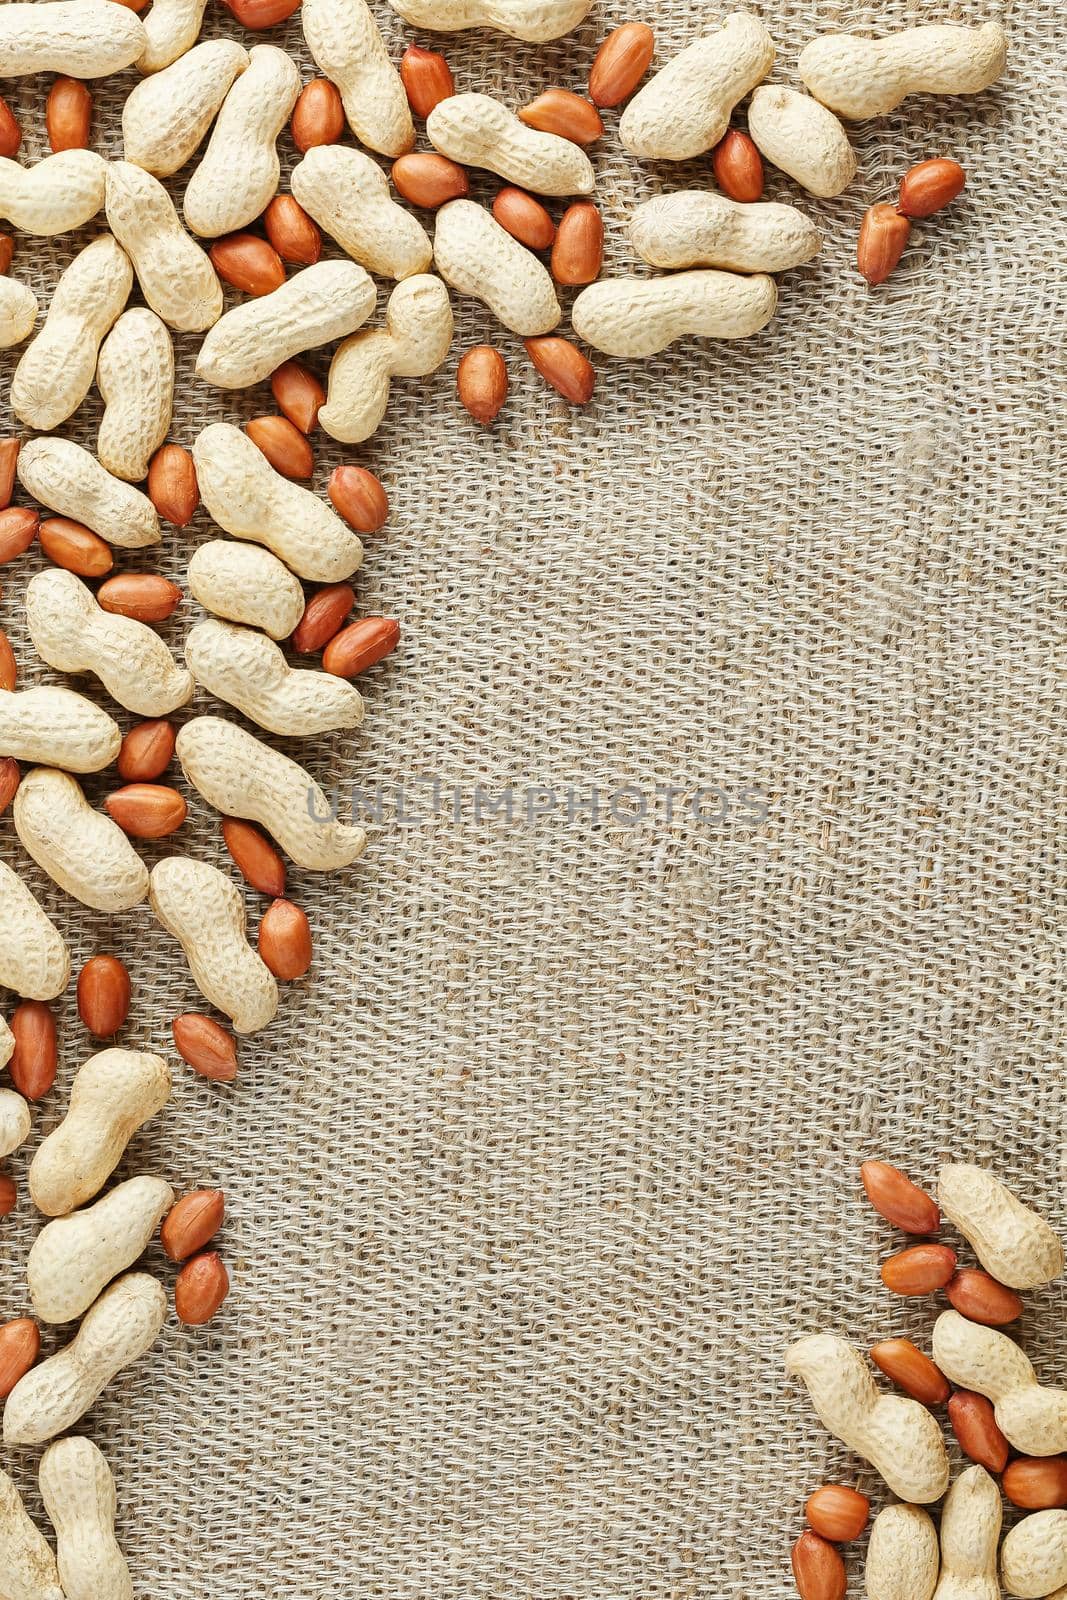 Peanut in shell and peeled peanuts closeup. Background with peanuts. Roasted peanuts in a shell and peeled on a brown fabric background.